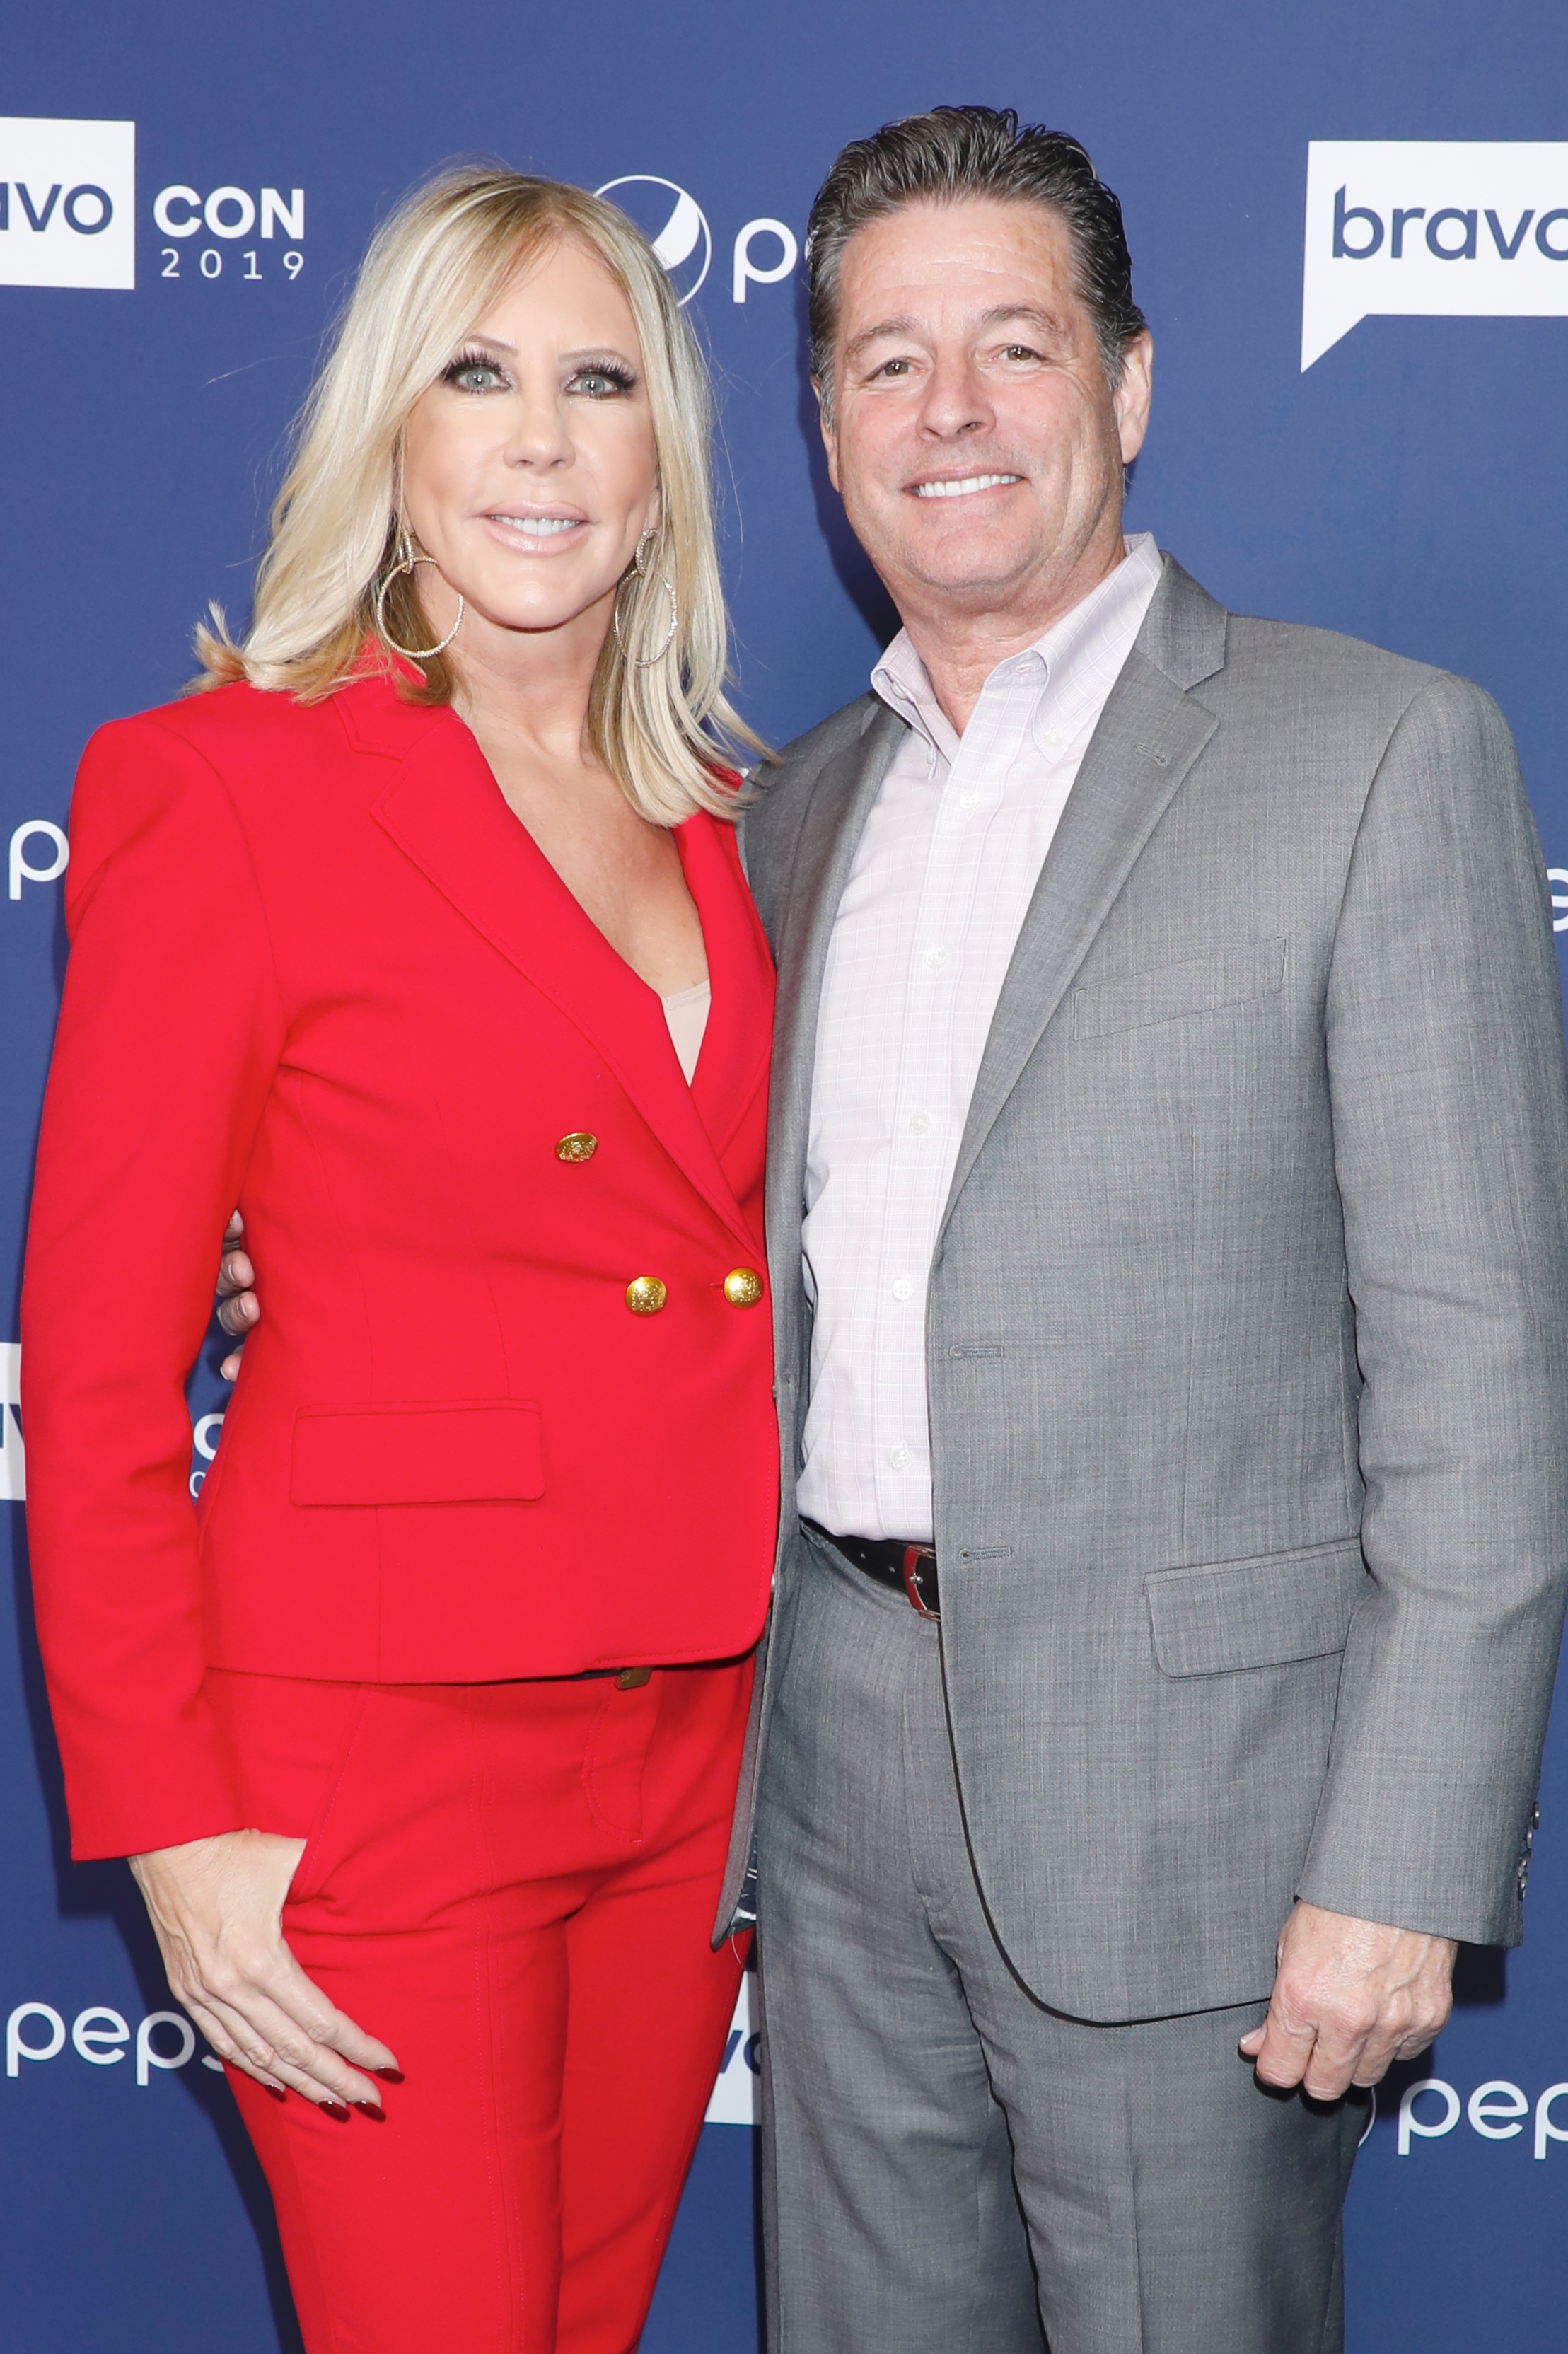 <p>On Oct. 15, 2021, Vicki Gunvalson took to Instagram to accuse <a href="https://www.wonderwall.com/celebrity/couples/celeb-splits-of-2021-breakups-divorces-424575.gallery?photoId=396518">her ex-fiancé</a>, Steve Lodge, of cheating on her. "He used me, he lied to me, he's been dating a 36 year old and is not what he portrays himself to be. No Christian man would do what he's done," she commented on <a href="https://www.instagram.com/p/CVDReuFlGdx/">a photo</a> of pal Tamra Judge. The 59-year-old former star of "The Real Housewives of Orange County" added in a second comment, "While I was out of town working on a biz trip, he took her to my condo in Mexico! He's been flaunting around my town in [Orange County] making out in public places. It's disgusting." When the 62-year-old <a href="https://www.wonderwall.com/celebrity/profiles/celebs-who-ran-for-political-office-35498.gallery">aspiring politician</a> caught wind of his ex's comments, he released a statement to multiple media outlets insisting that the reality star was lying: "The absolute lies she is now spreading on social media [are] very disappointing and disingenuous, to say the least. But I cannot say I'm surprised," he said, adding that he and Vicki "had not been in an intimate relationship since September of 2020" and that he's been living in his own condo in Mexico -- not hers -- "since the beginning of 2021." He also claimed that he and Vicki agreed to remain friends following <a href="https://www.wonderwall.com/celebrity/couples/emma-watson-dating-son-of-controversial-british-billionaire-more-celeb-love-news-late-september-2021-romance-report-504055.gallery?photoId=396518">their split</a> but that it's now "clear" to him that she "was still wanting more." Said Steve, according to <a href="https://www.usmagazine.com/celebrity-news/news/steve-lodge-vicki-gunvalsons-cheating-claims-are-absolute-lies/">Us Weekly</a>, "I told her [that] was not possible. I wanted to move on with my life and I could not do that with Vicki. I'm sorry that Vicki cannot accept this, but it was time." He concluded by saying he wishes his former love "the best." After Steve released his statement, Vicki told <a href="https://pagesix.com/2021/10/15/steve-lodge-denies-cheating-on-ex-rhoc-star-vicki-gunvalson/">Page Six</a>, "He is correct, that he rented a 1 bedroom condo in the complex that I purchased a home in for our retirement in April. He continued to stay with me when I was there, but physically moved out of both my homes 3 weeks ago. Yes, he is right about wanting to "move on with his life", but still living together gave me hope that we would be OK." Steve got engaged to another woman -- teacher Janis Carlson -- three months after news of his and Vicki's split made headlines.</p>